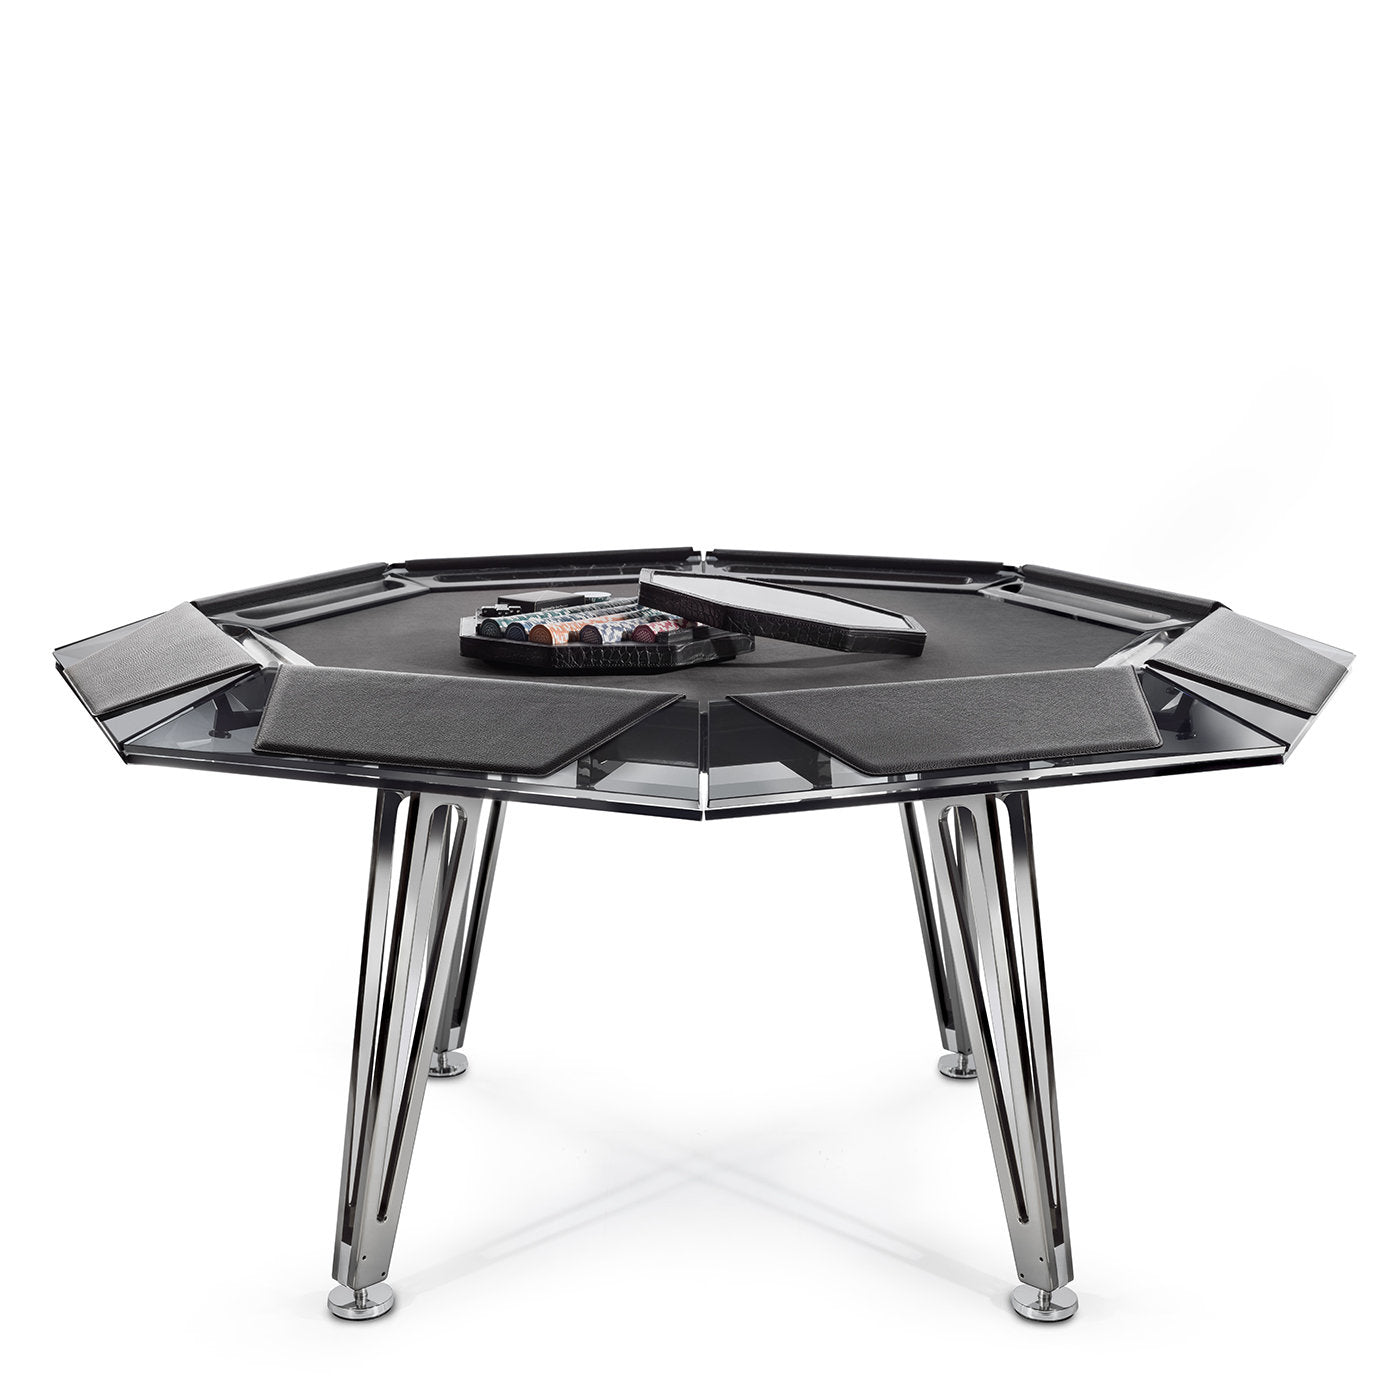 Unootto 8-Player Black Poker Table - Alternative view 2